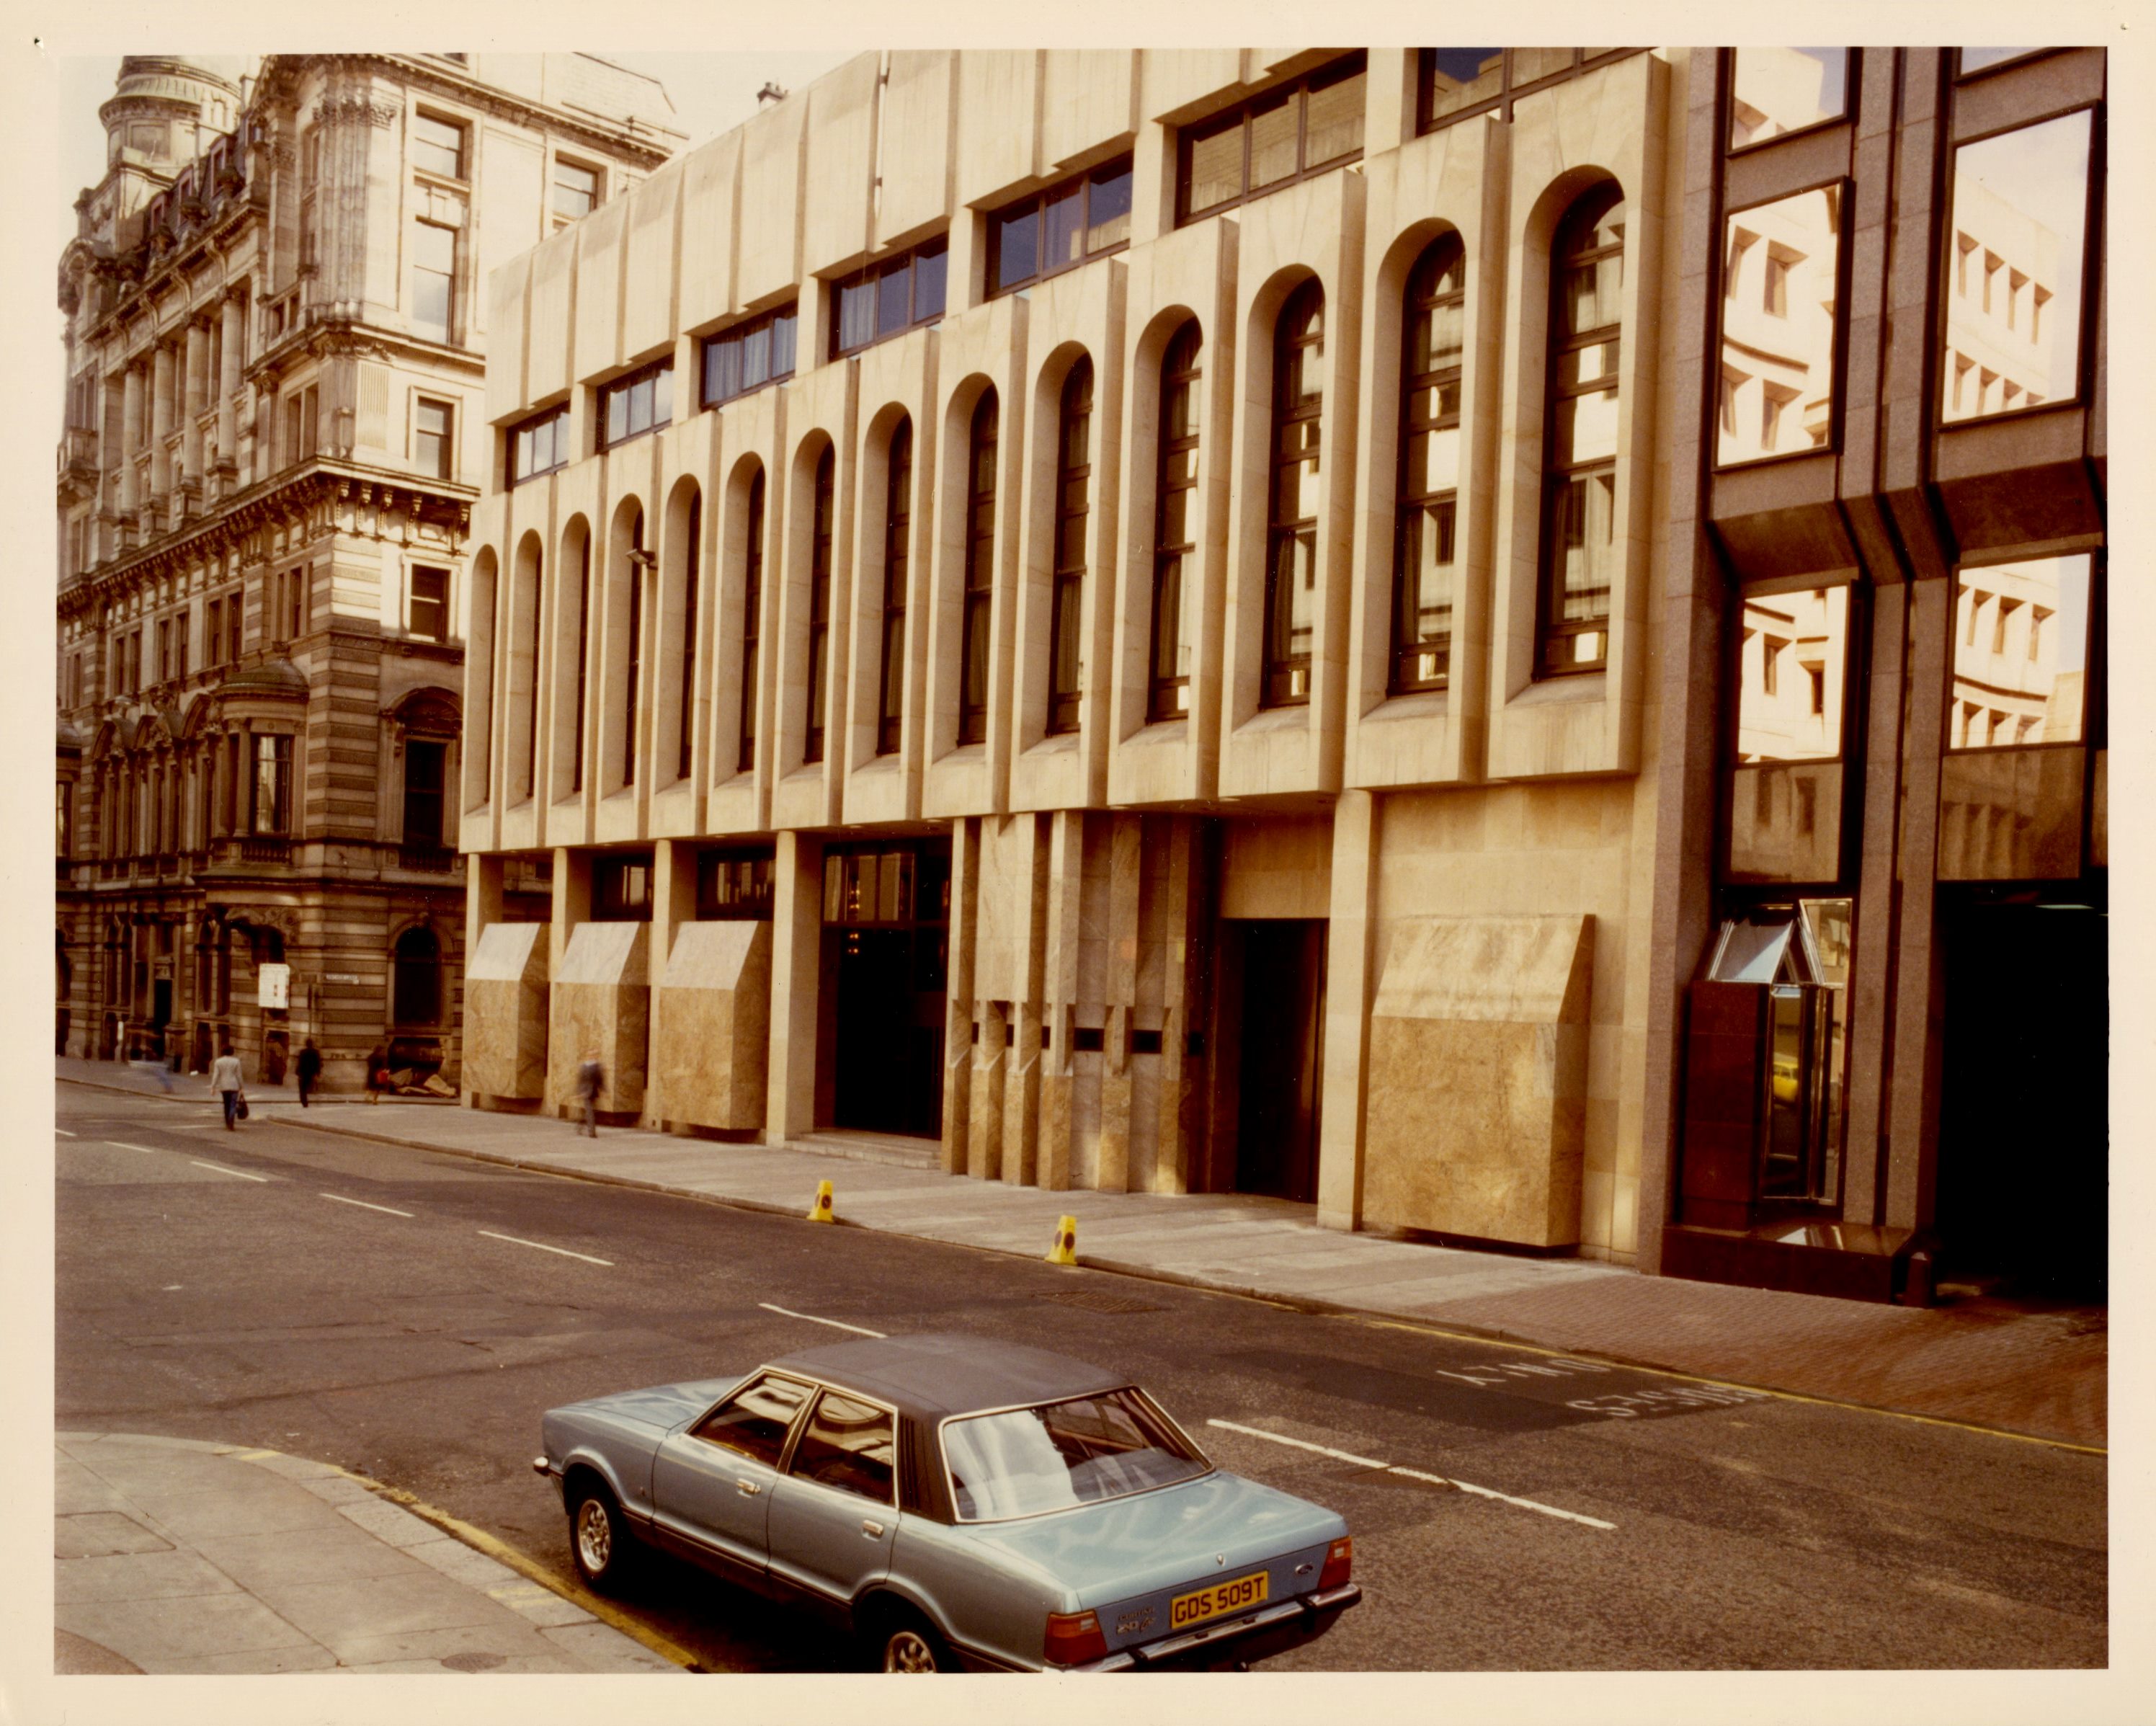 Glasgow Office, May 1979 which later became the Agency for Scotland in 1997 (Archive reference: 15A13/12/16/13)